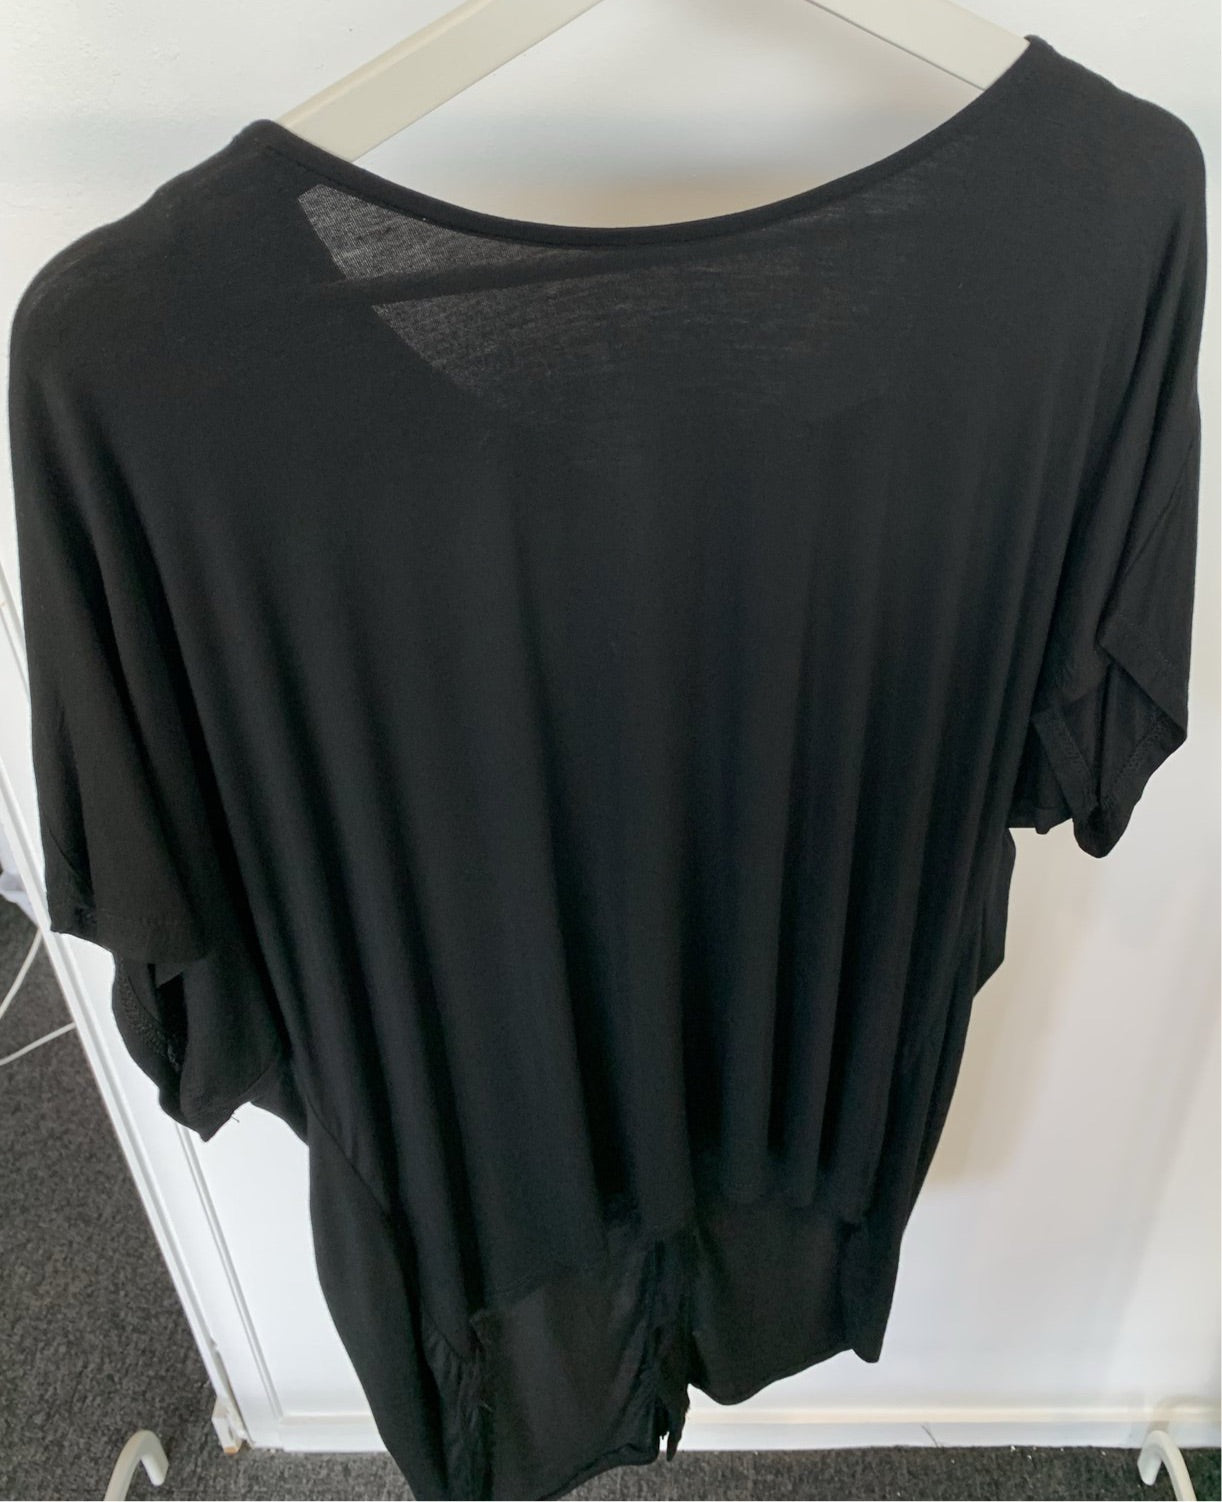 Silver Wishes Asymmetric Hemline Black Top with Double Zip at the back